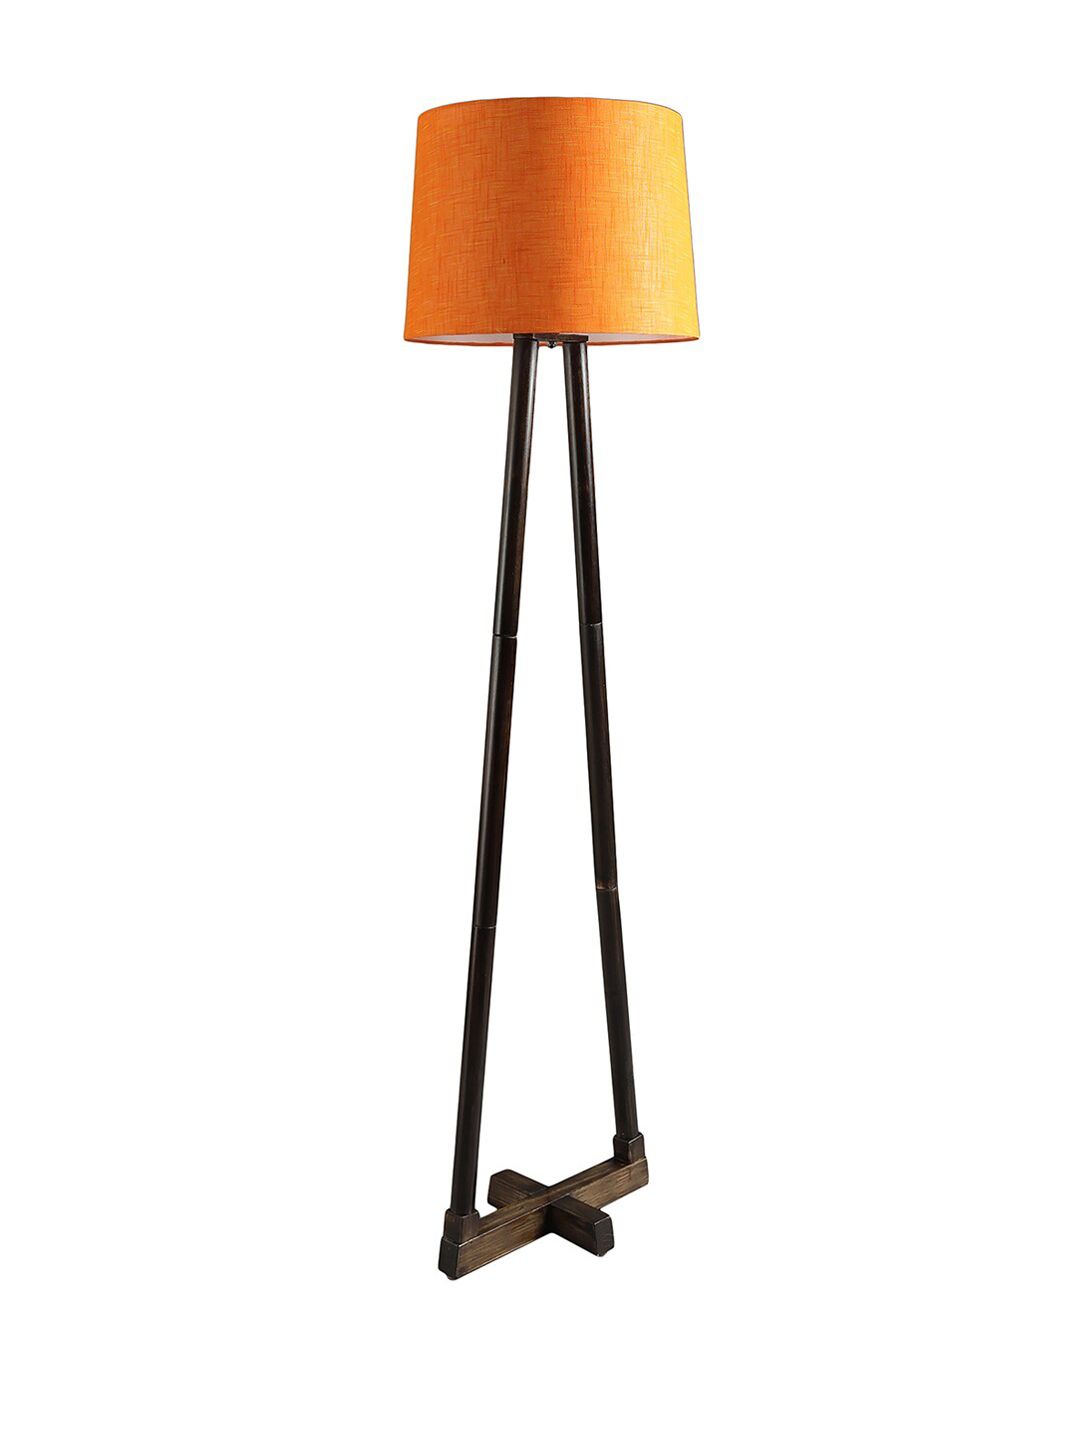 SANDED EDGE Tranquil Orange Solid Wood Floor Lamp With Cotton Shade Price in India